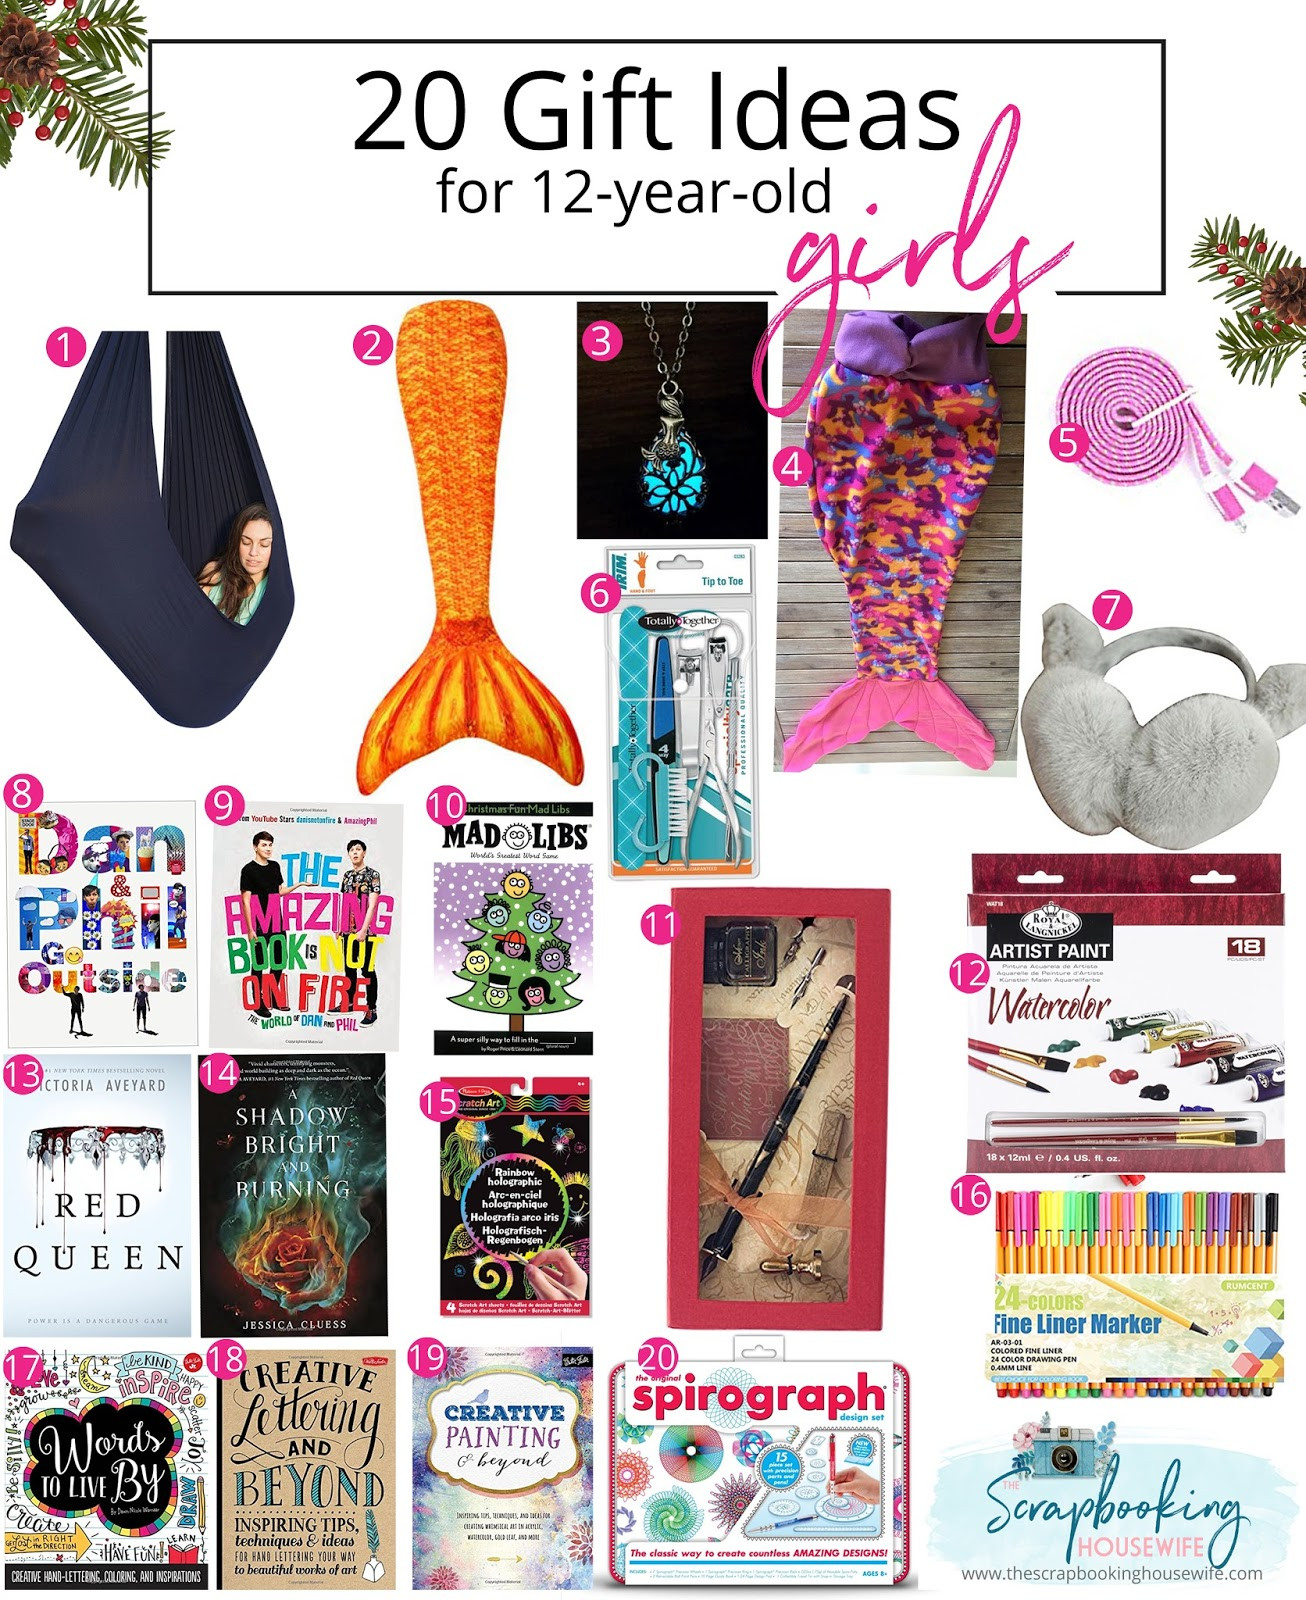 11 Yr Old Girl Christmas Gift Ideas
 Ellabella Designs 13 GIFT IDEAS FOR TODDLERS